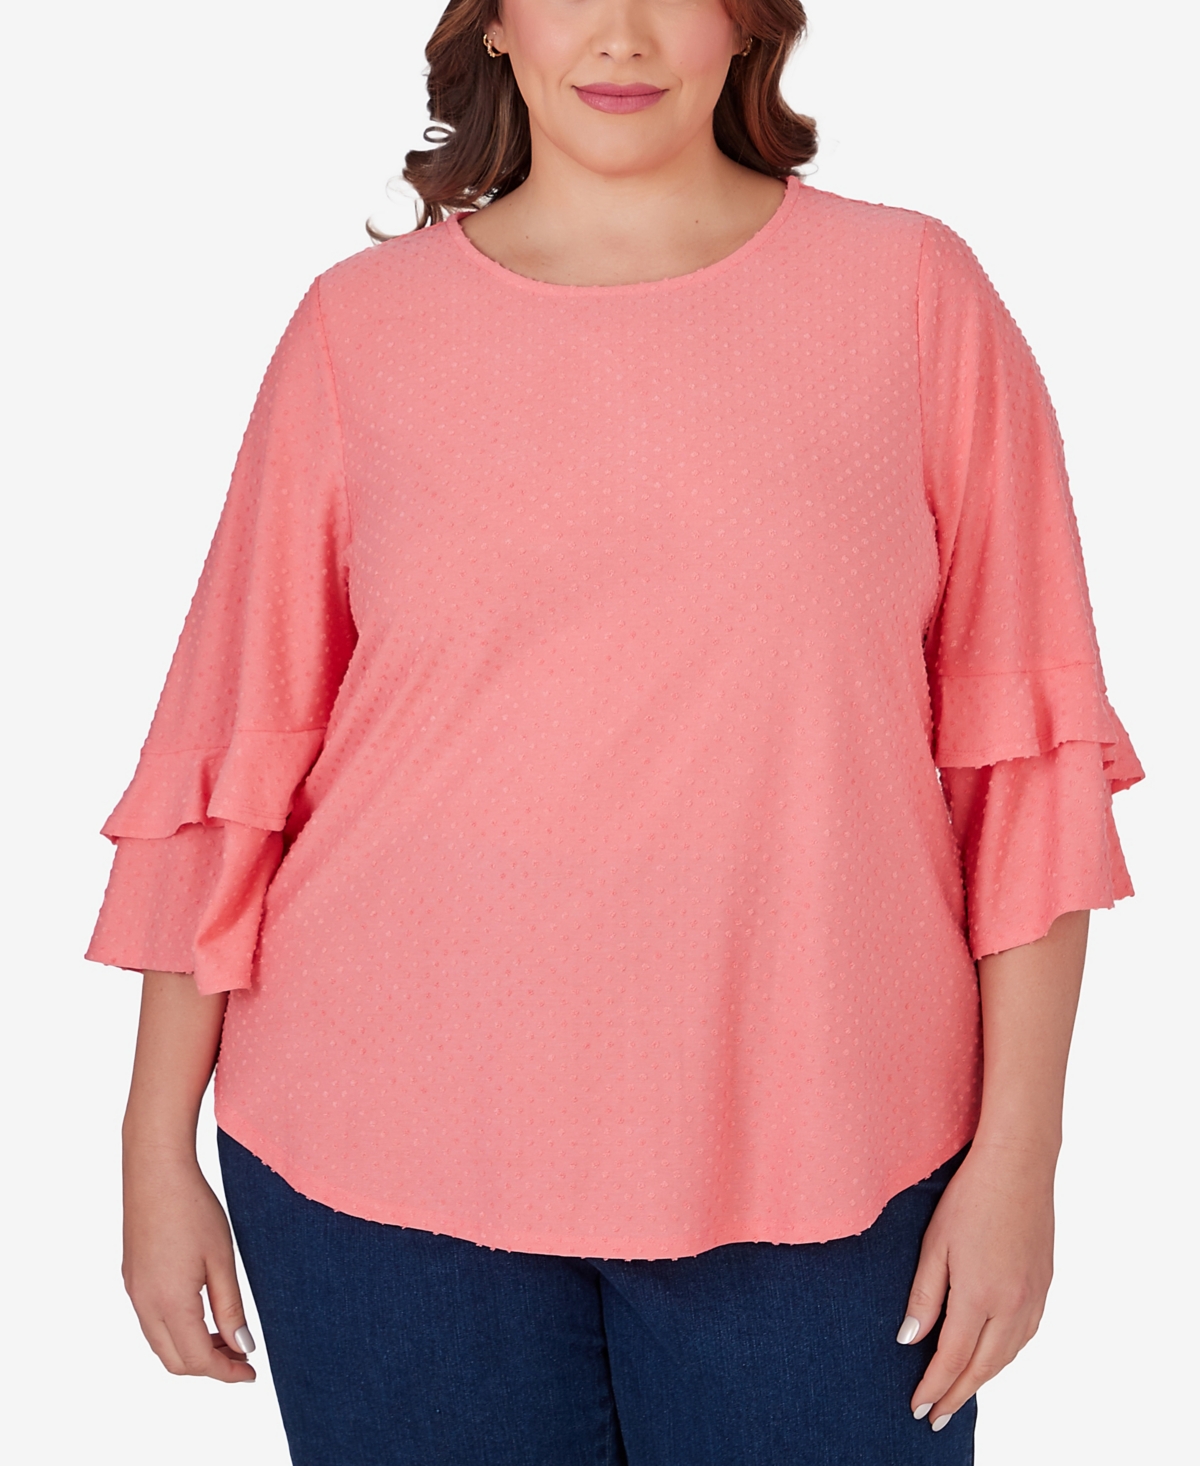 Ruby Rd. Plus Size Swiss Dot Textured Solid Party Top In Guava